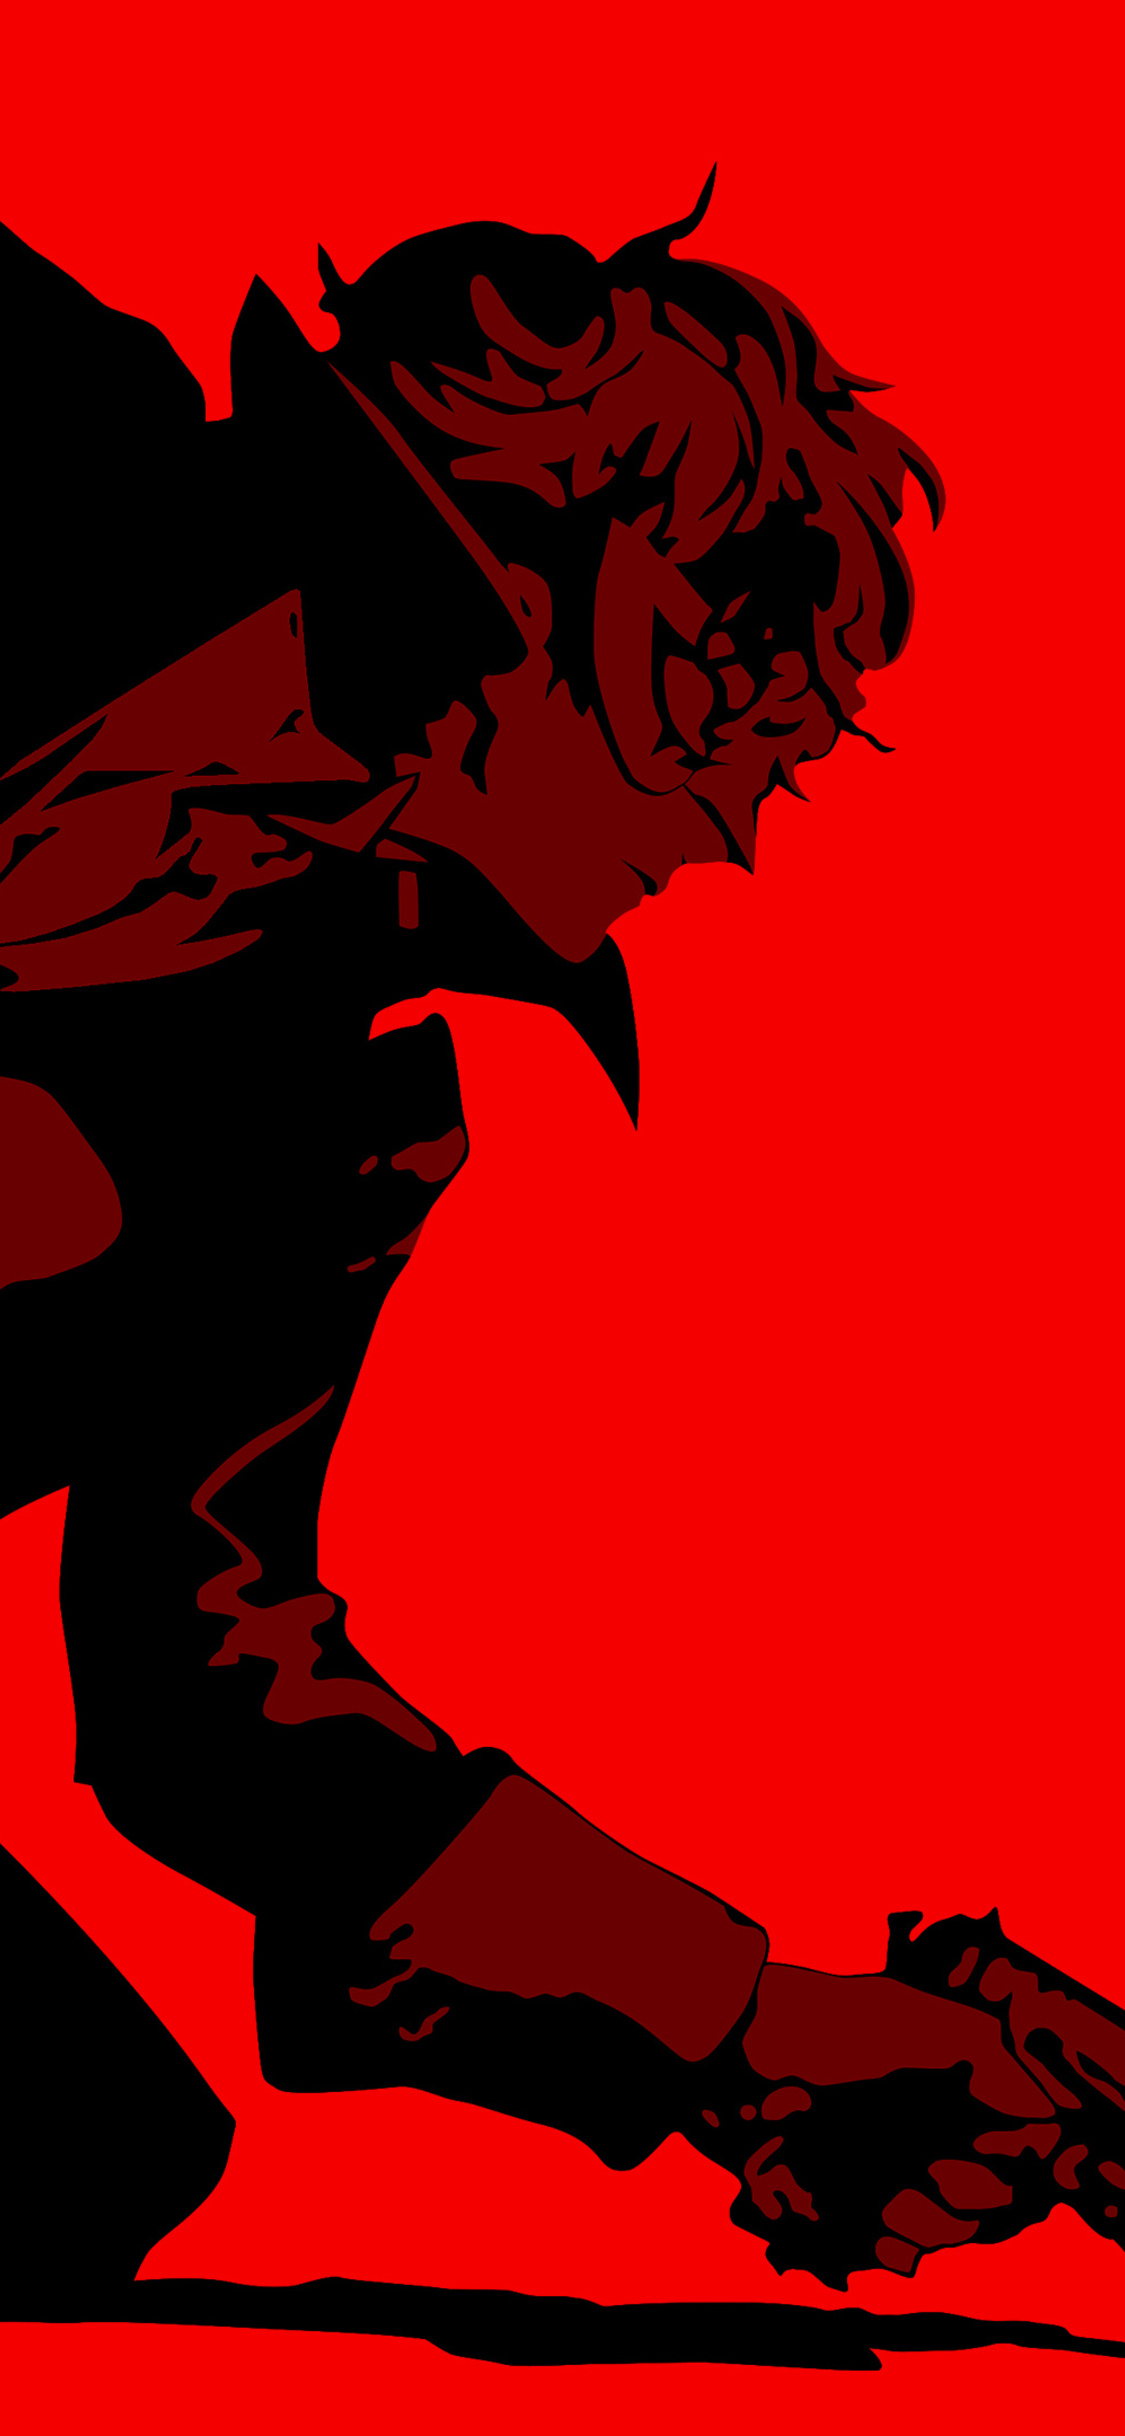 Persona 5 Wallpapers on WallpaperDog